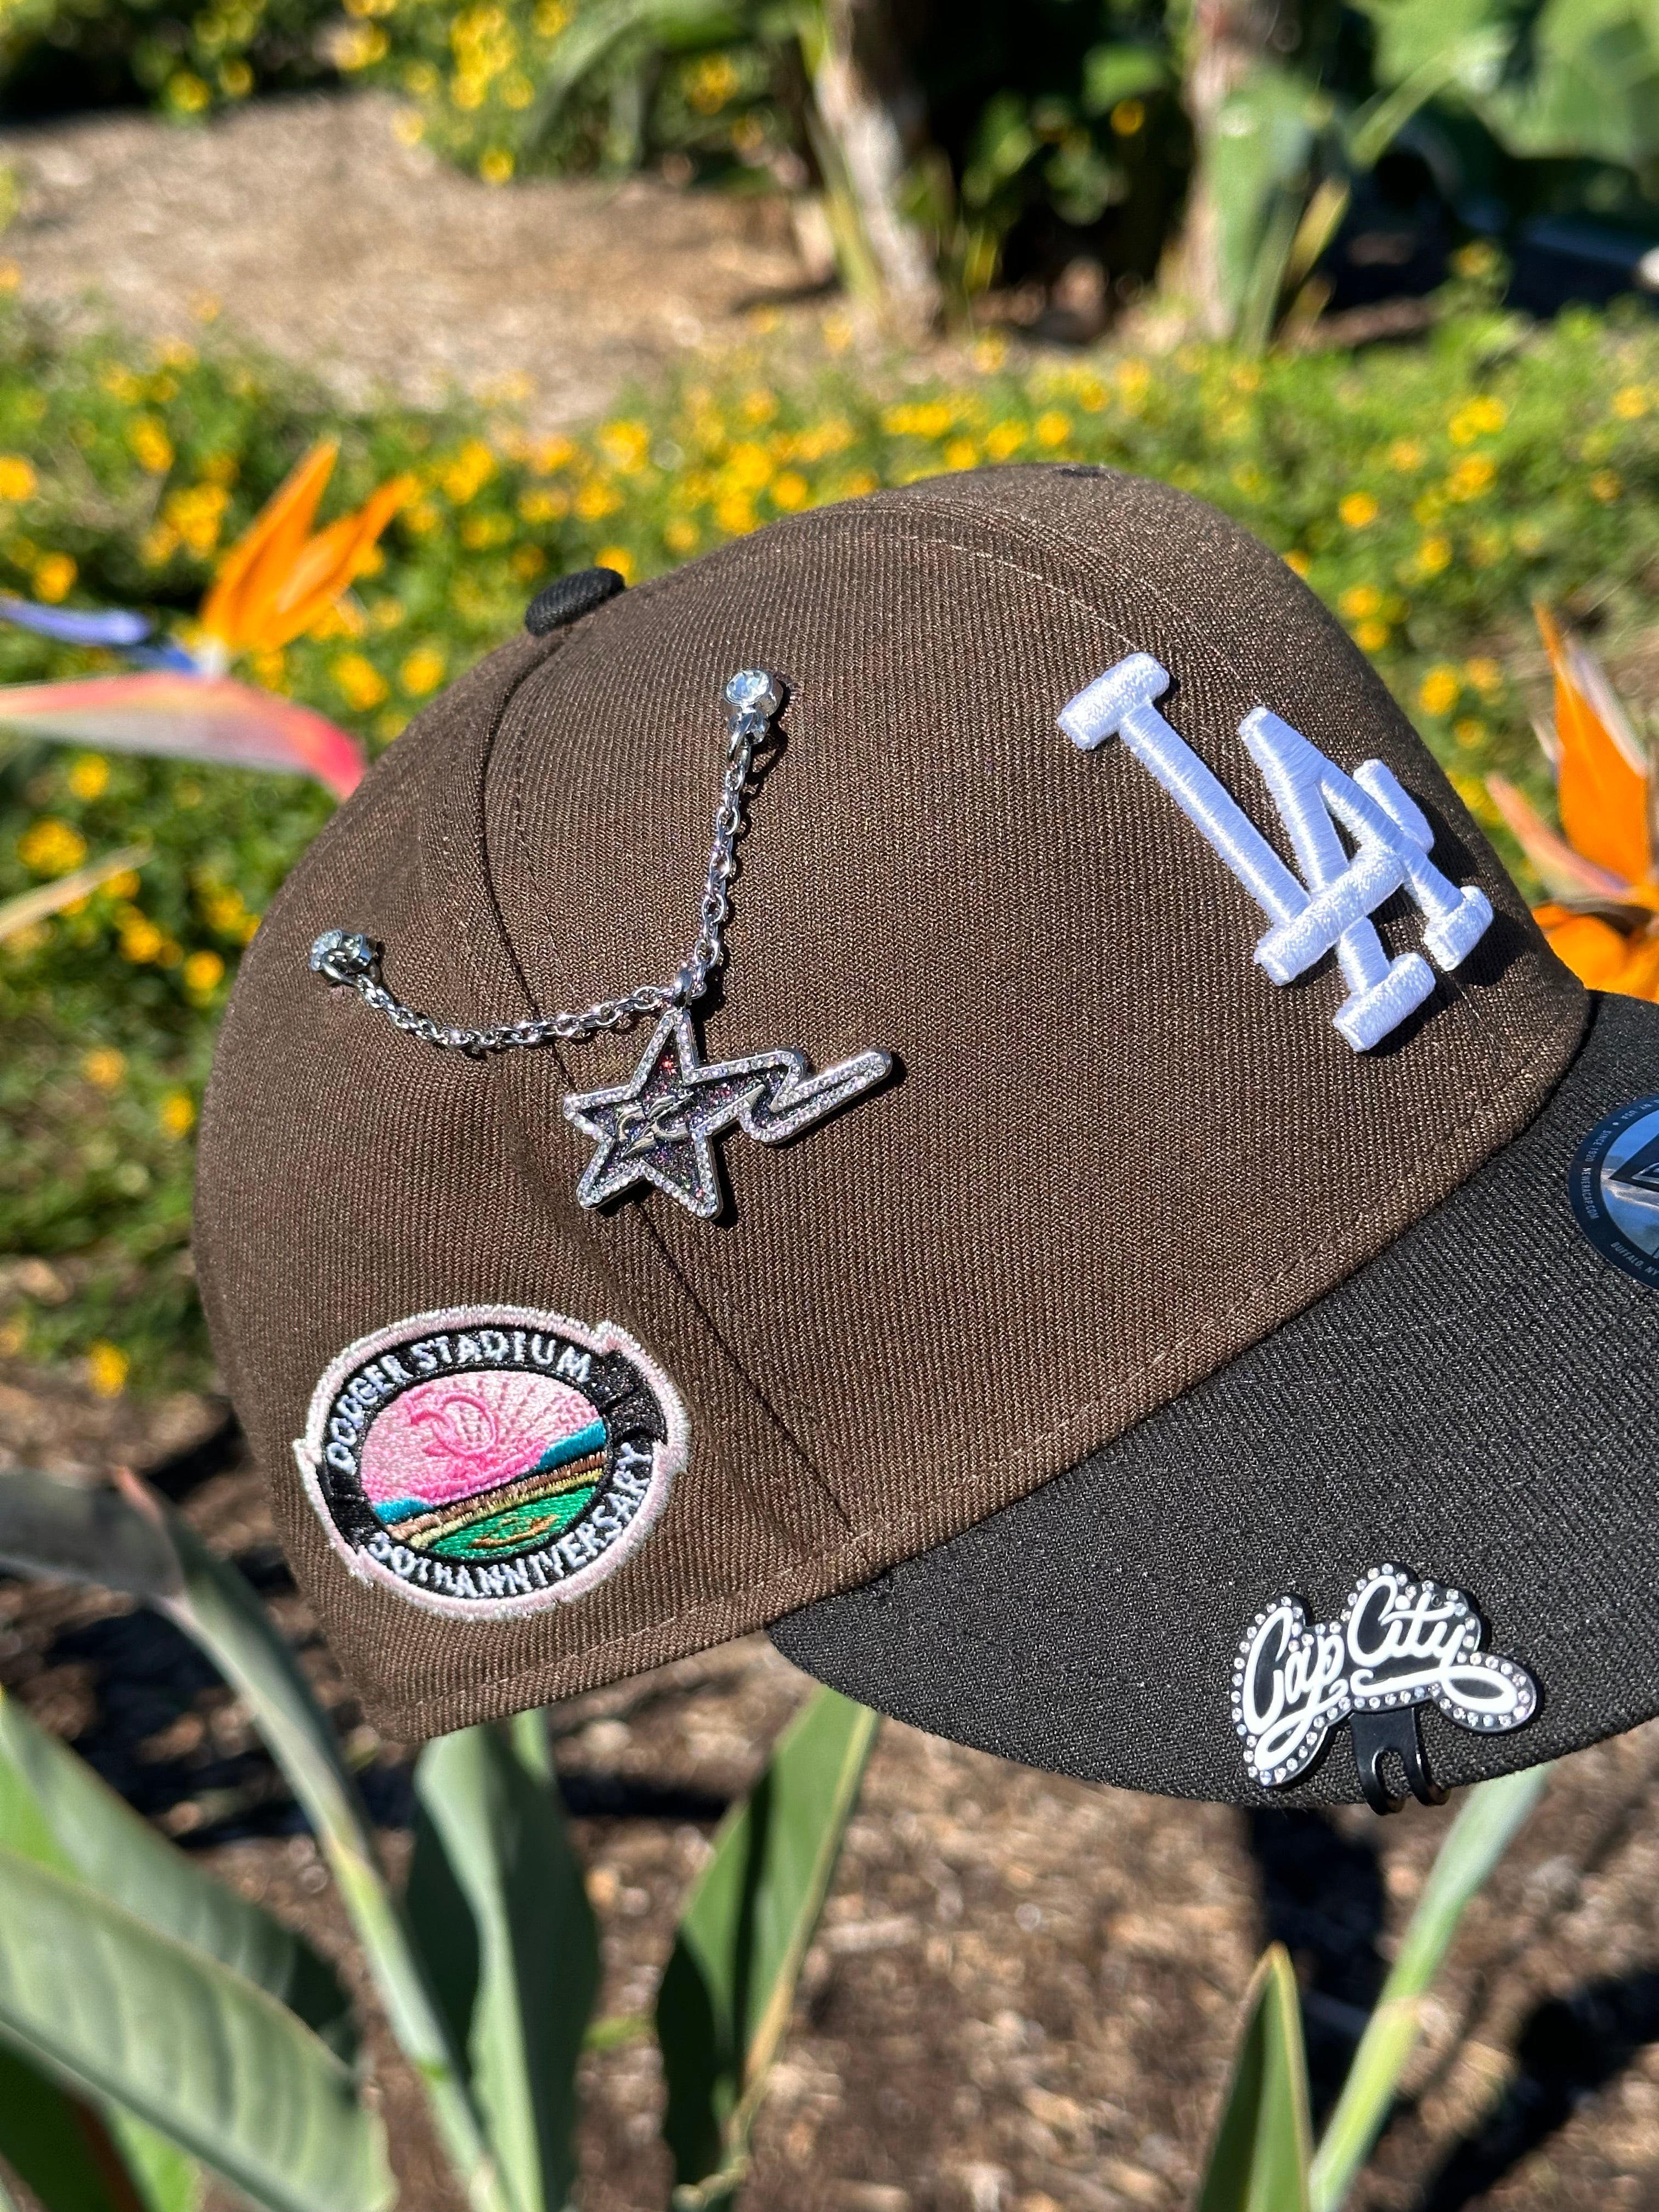 NEW ERA EXCLUSIVE 9FIFTY MOCHA/BLACK LOS ANGELES DODGERS SNAPBACK W/ 50TH ANNIVERSARY PATCH